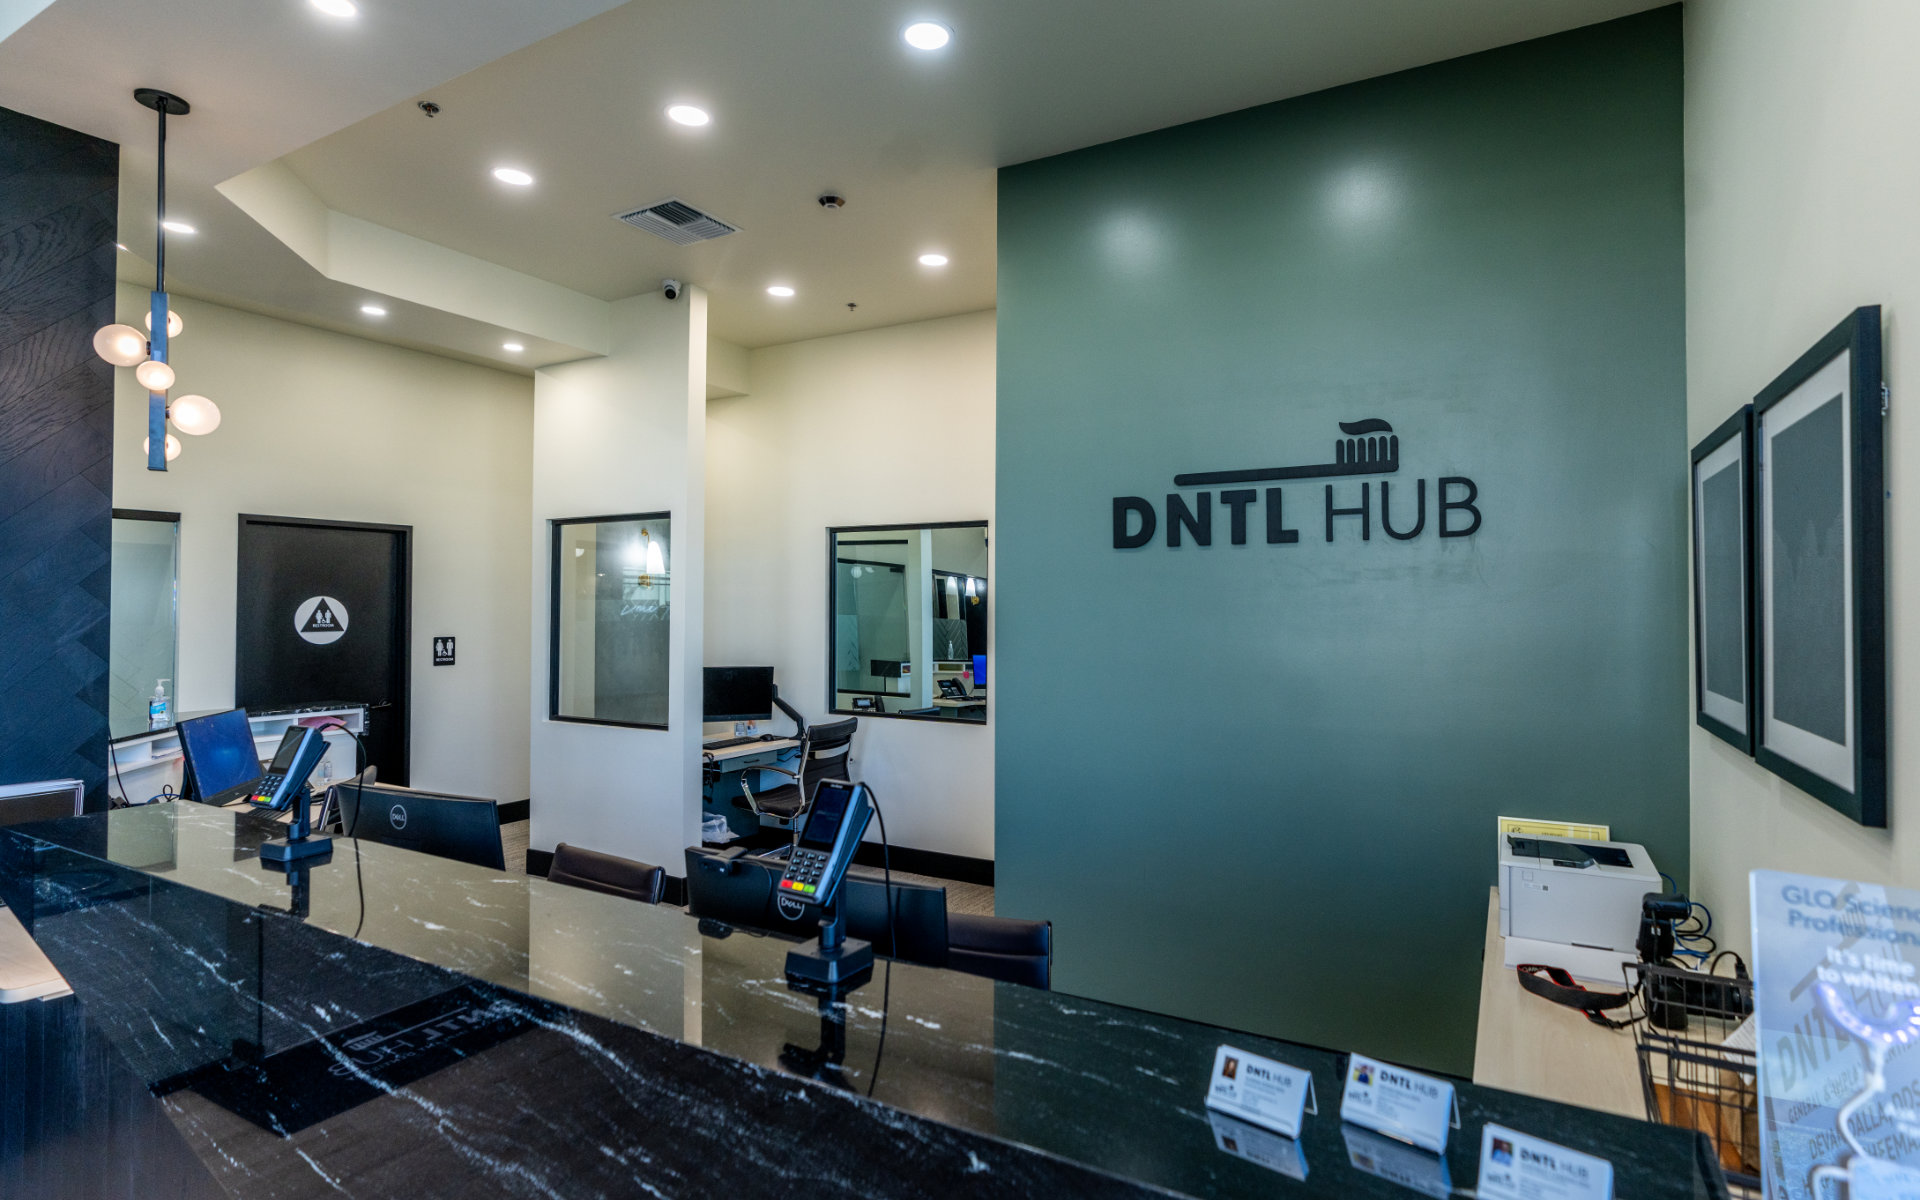 dntlhub office with logo on the wall